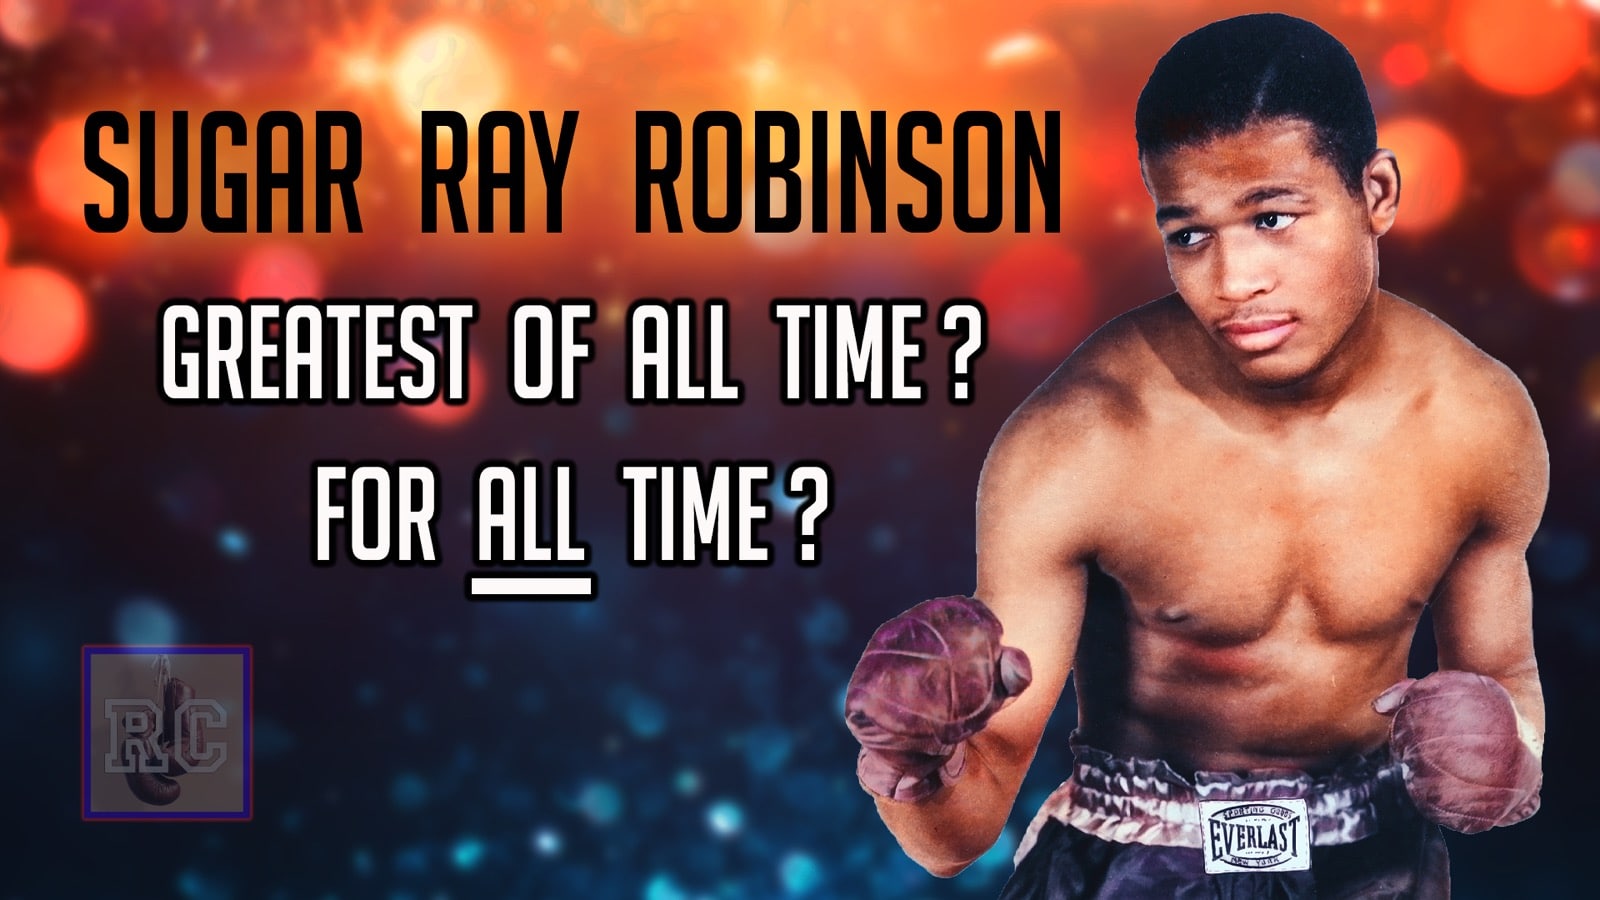 Image: VIDEO: Sugar Ray Robinson - GOAT for ALL time?